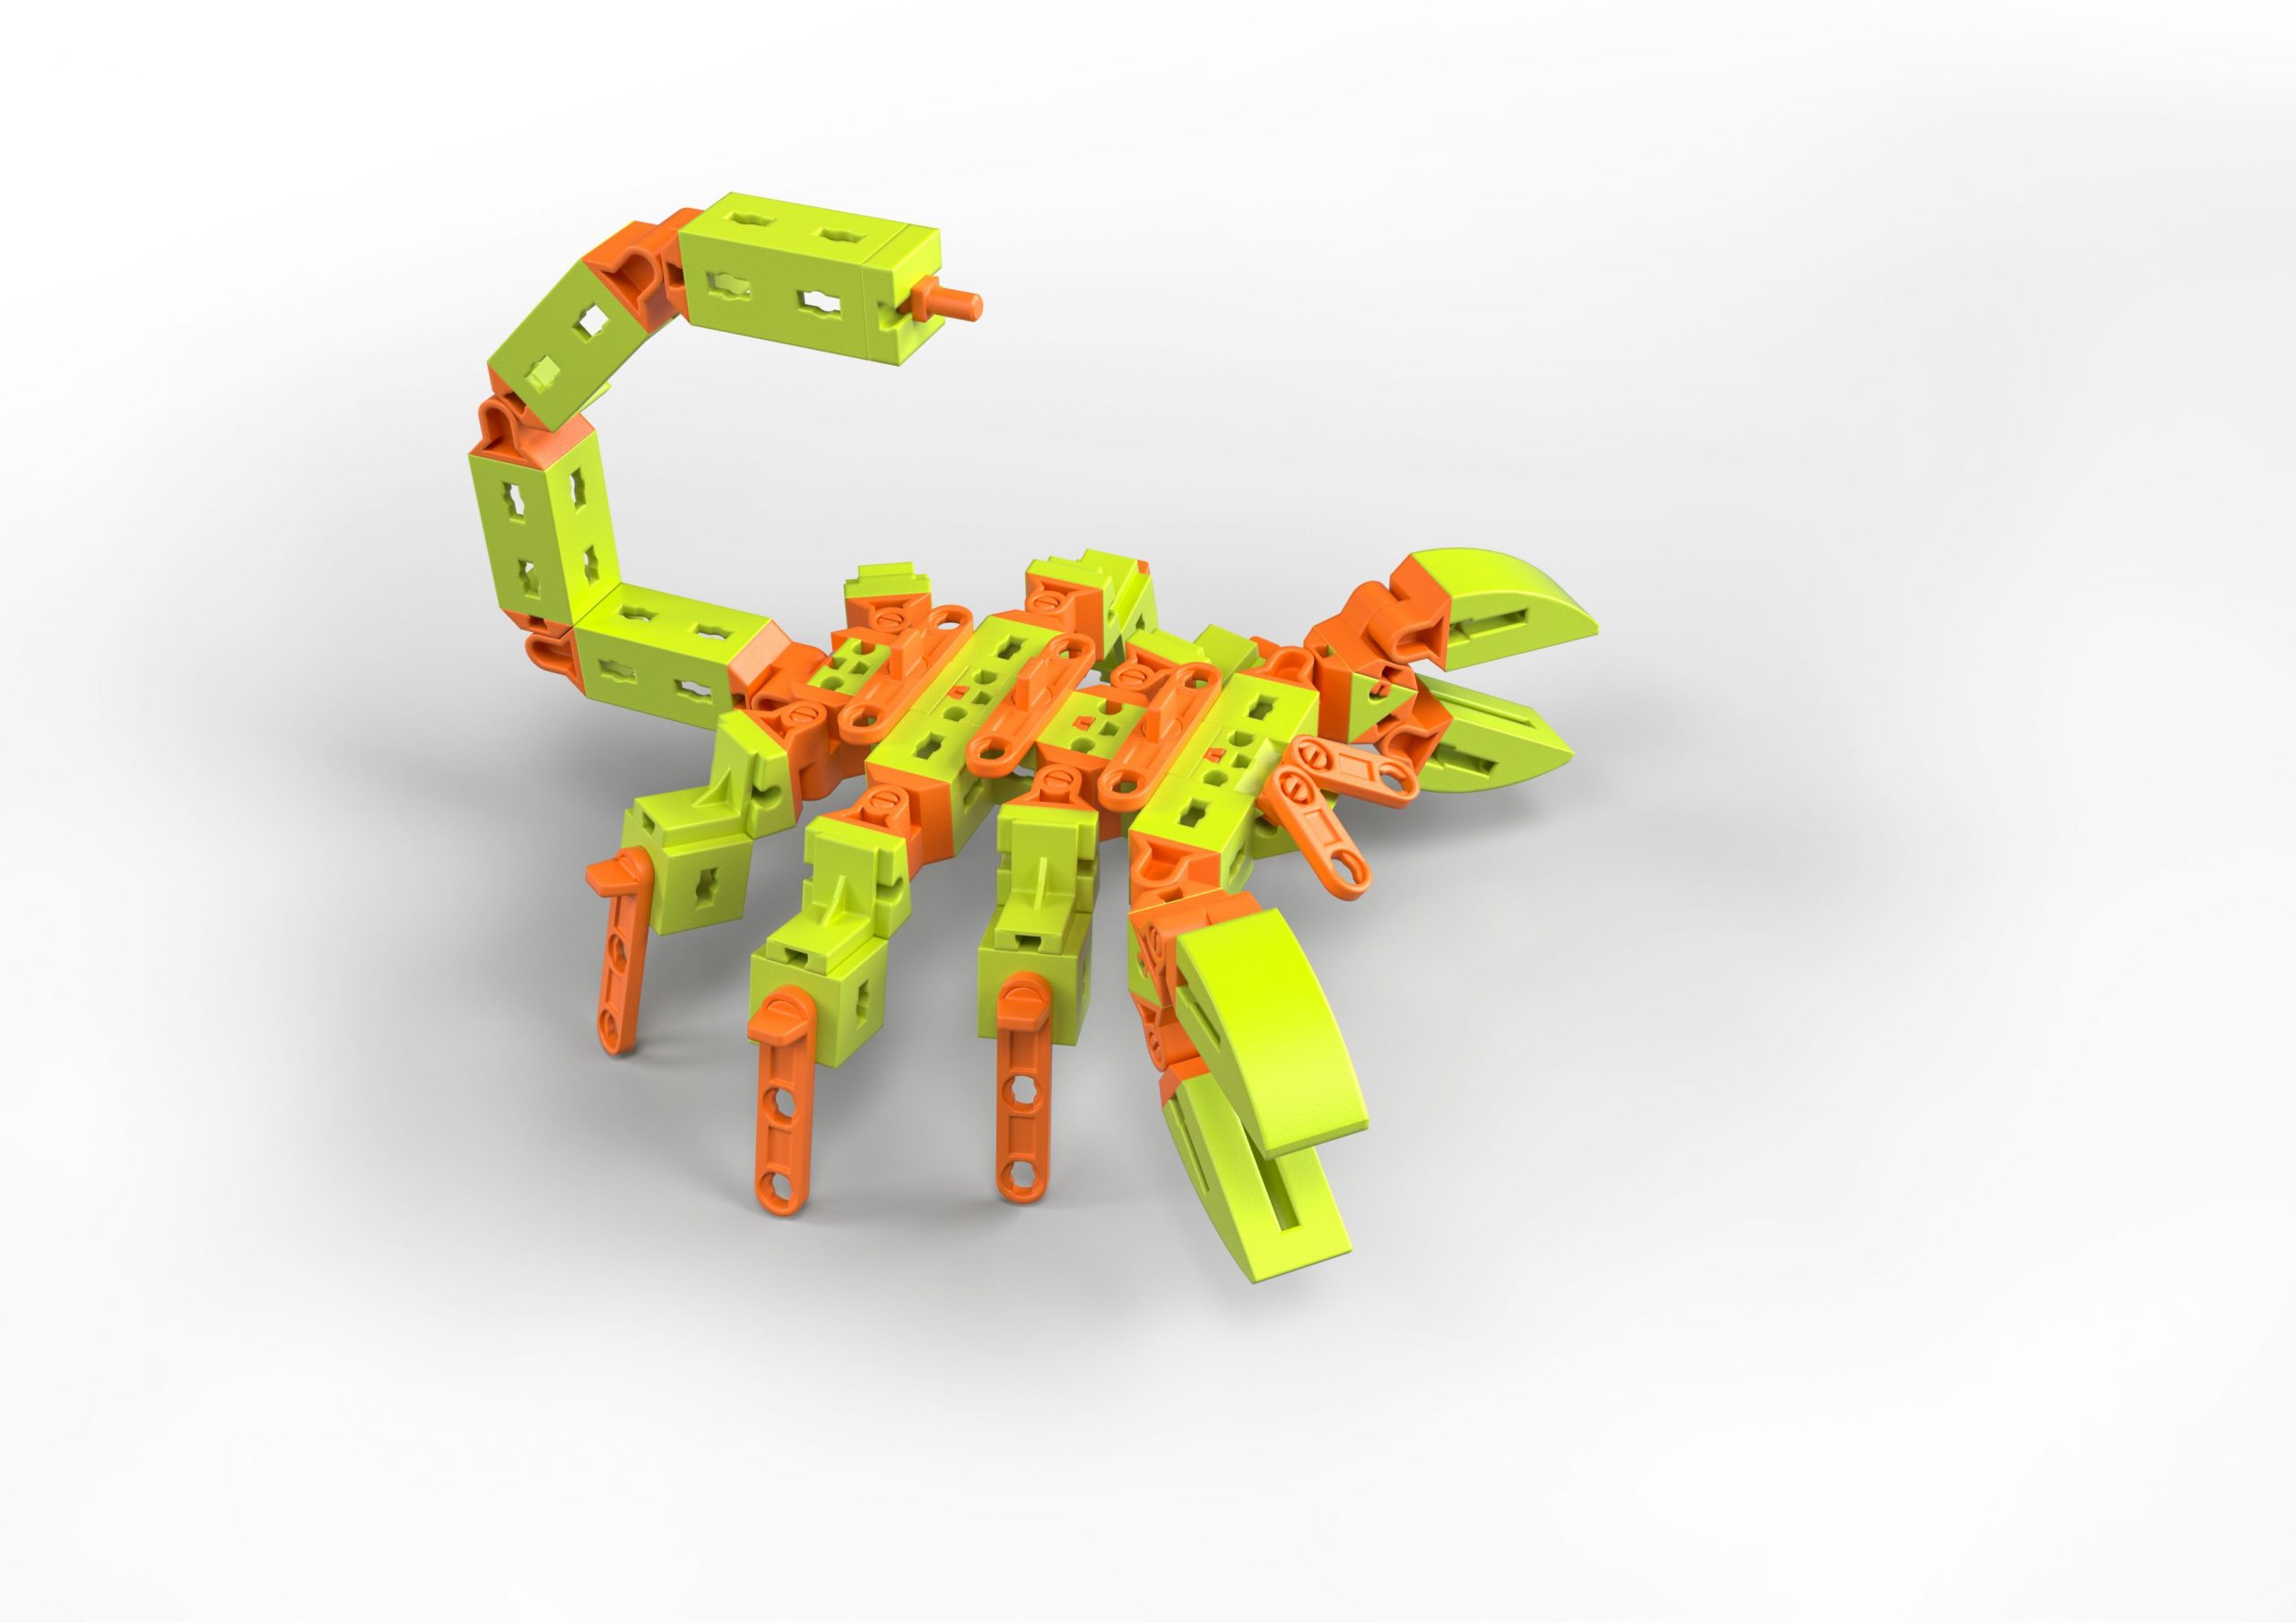 The Sandy the scorpion model from the fischertechnik Animal Friends construction kit. The building blocks consist of 60 per cent renewable resources.